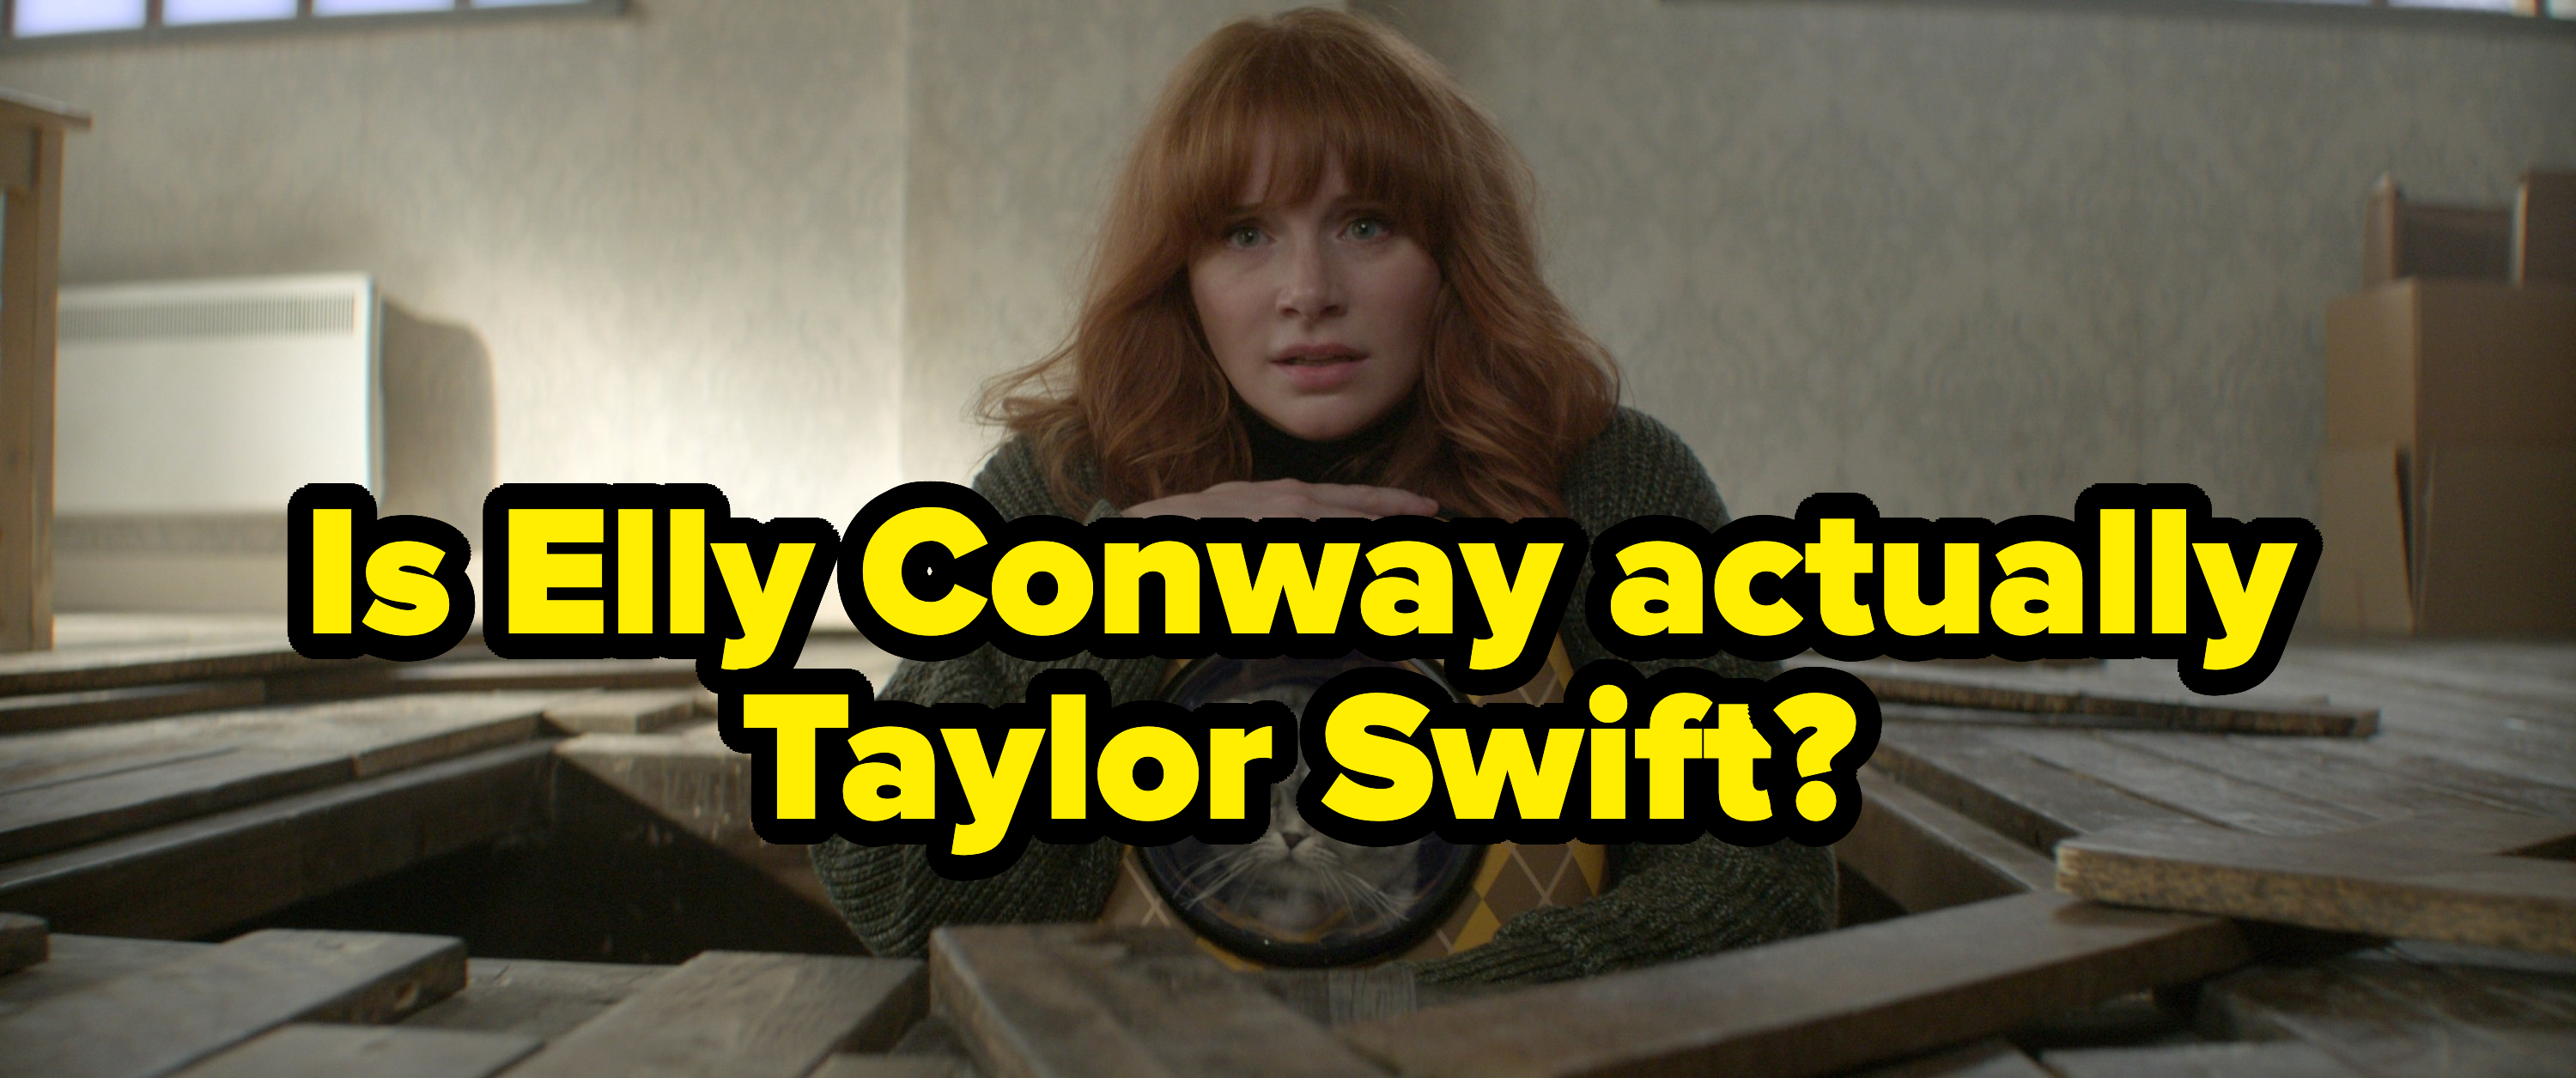 &quot;Is Elly Conway actually Taylor Swift?&quot;